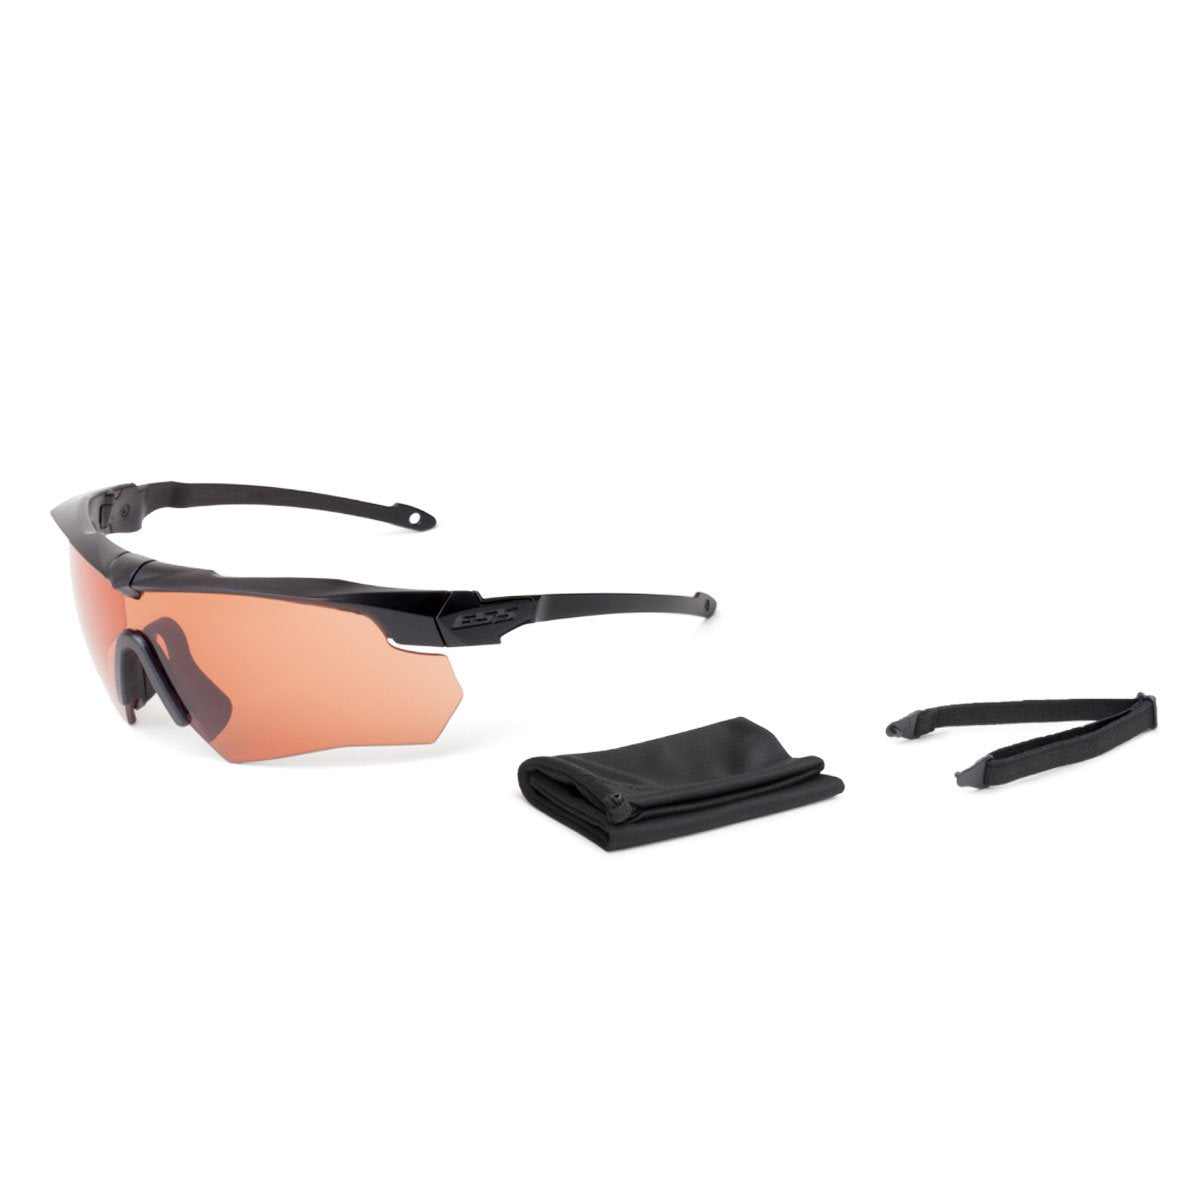 ESS Eye Safety Systems Crossbow Suppressor ONE Copper Eyewear Eye Safety Systems Tactical Gear Supplier Tactical Distributors Australia